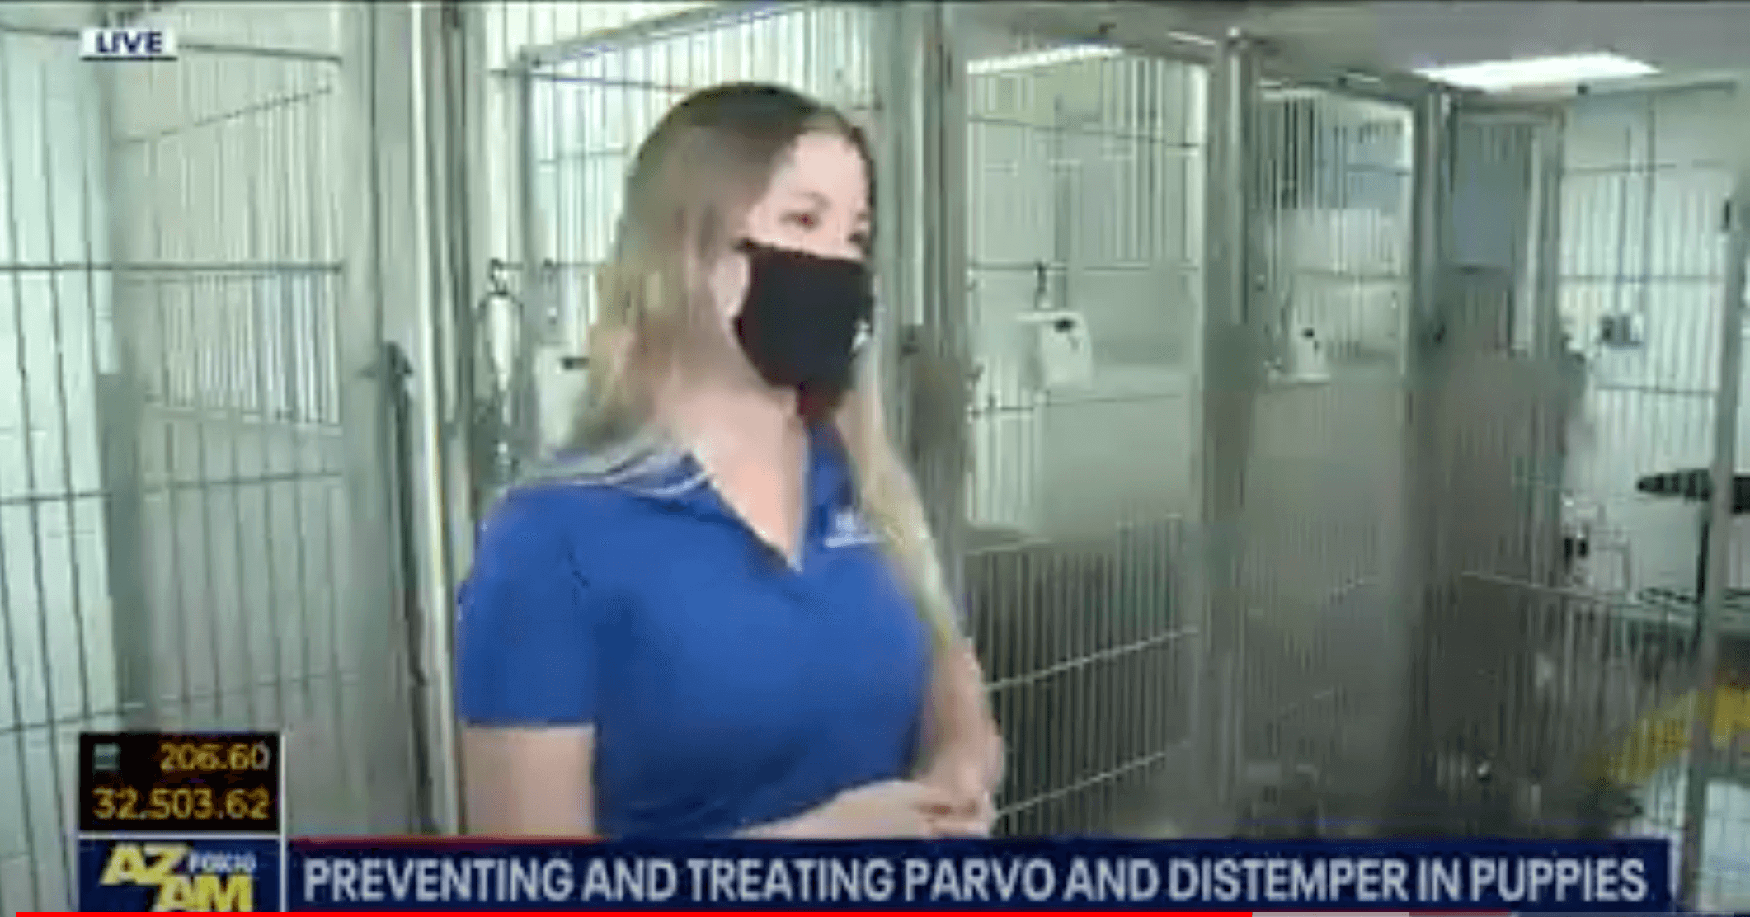 AHS discussing pet Parvo on the news